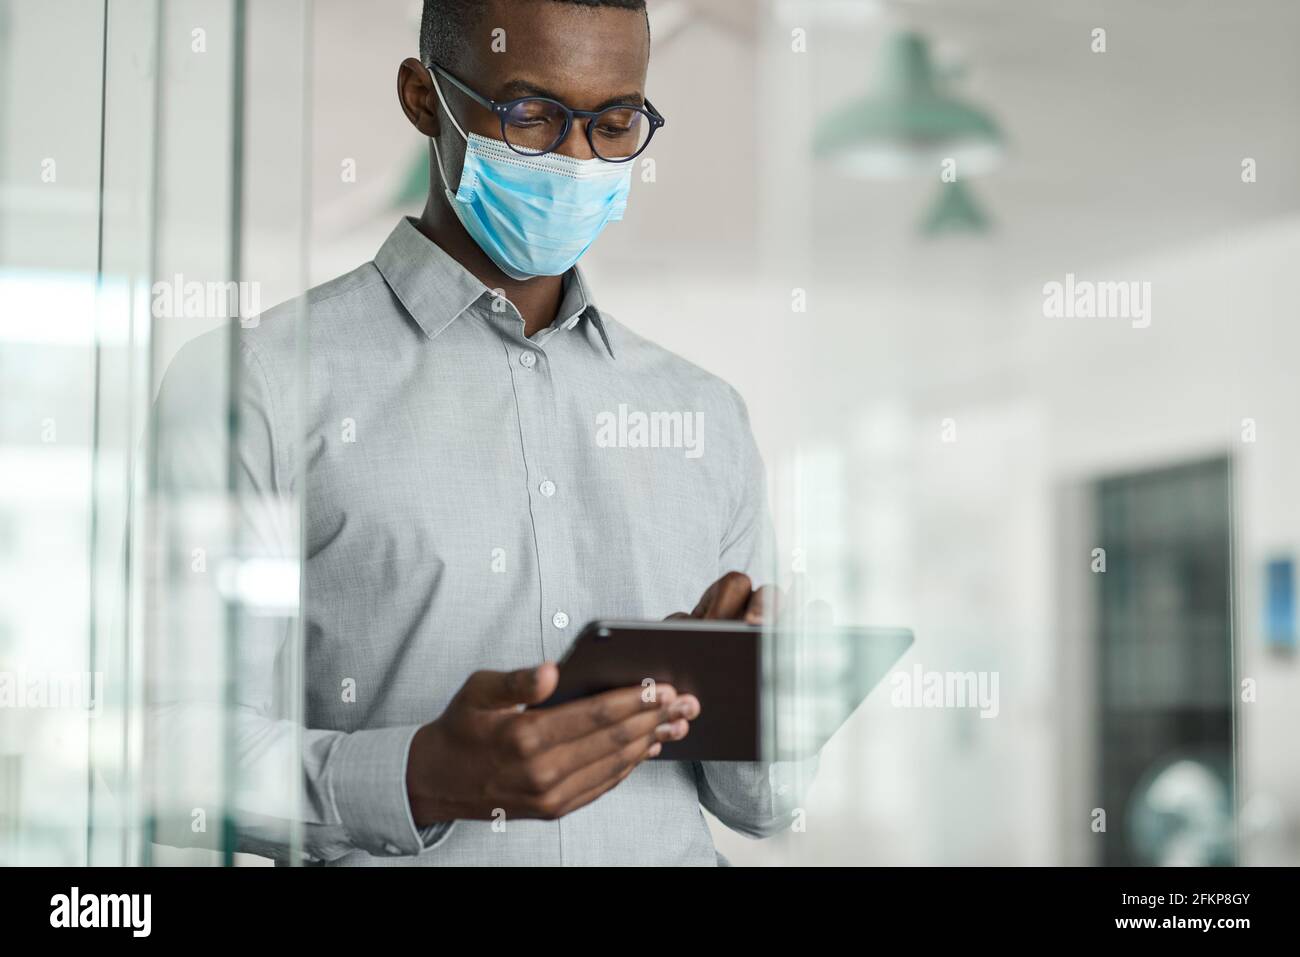 African businessman wearing a face mask using a digital tablet Stock Photo